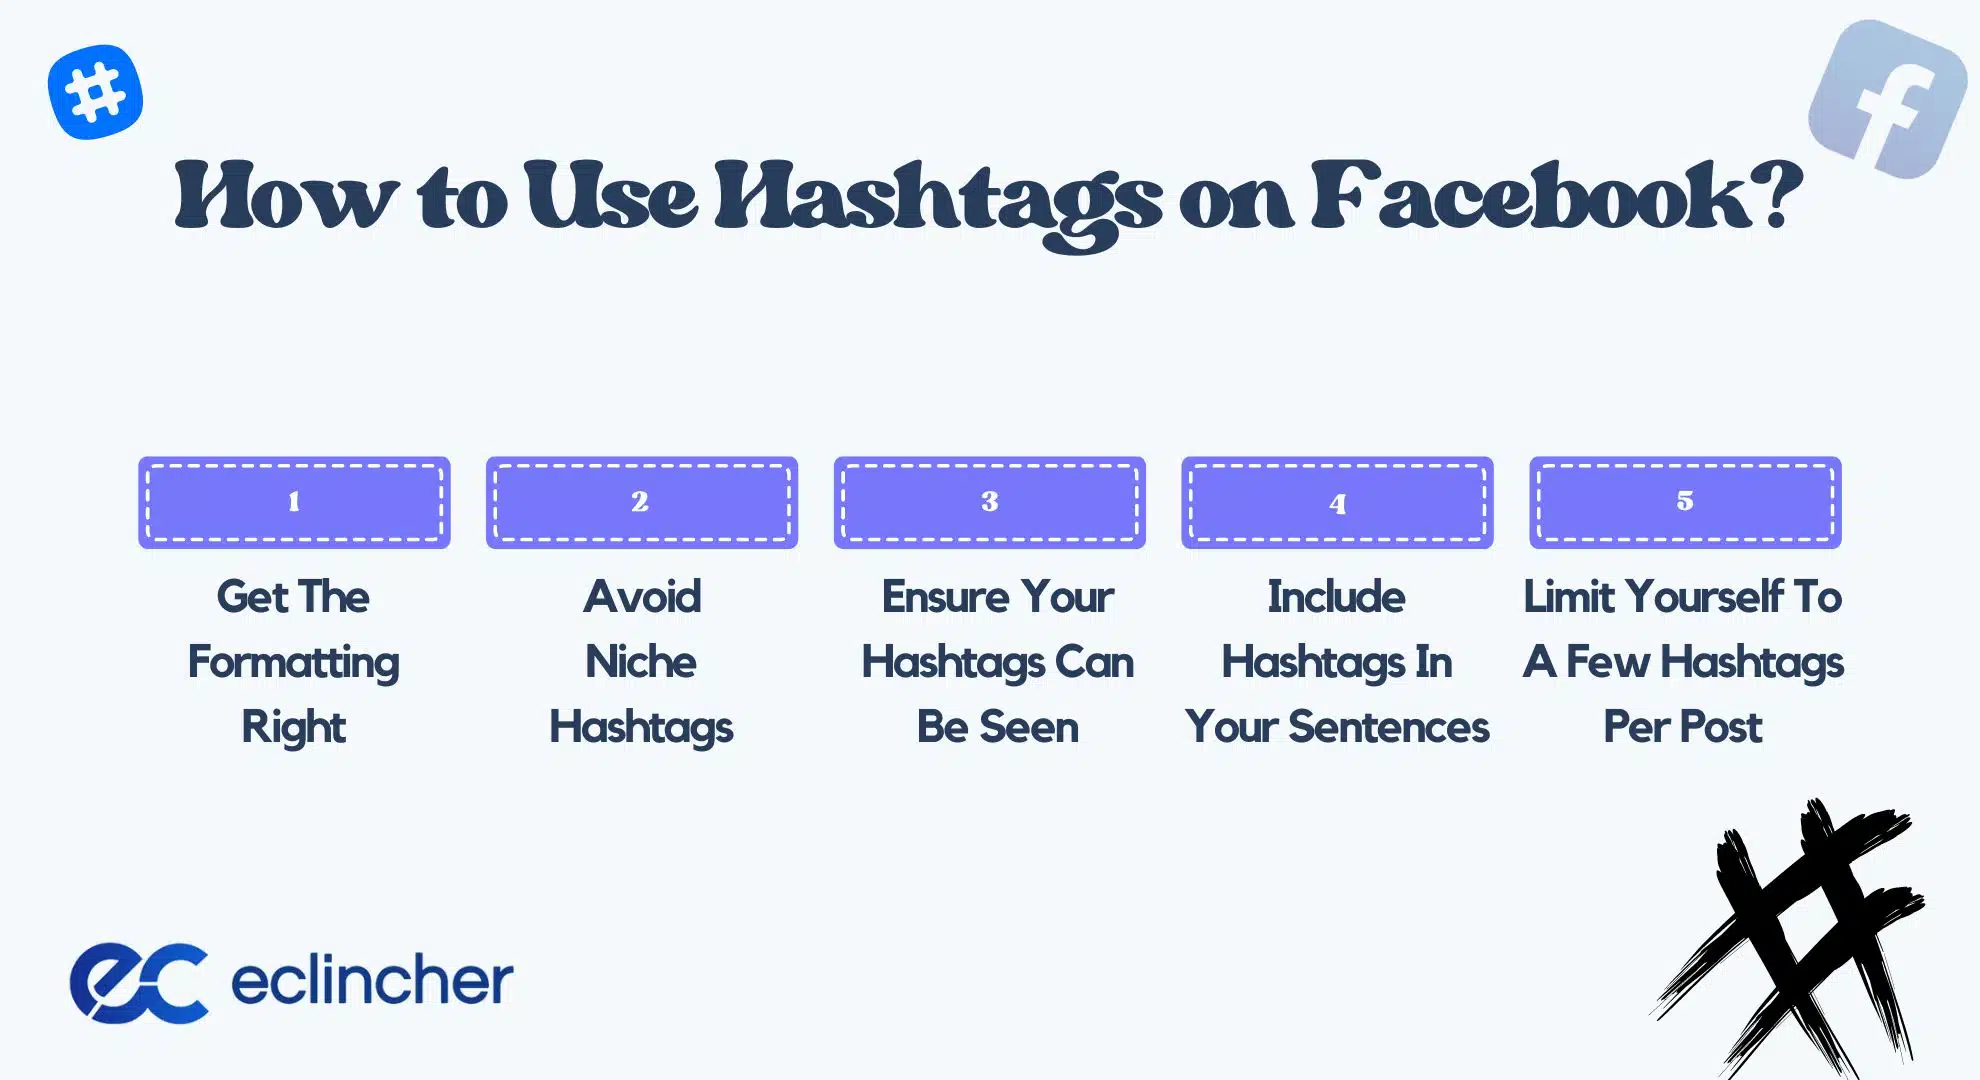 How to Use Hashtags on Facebook